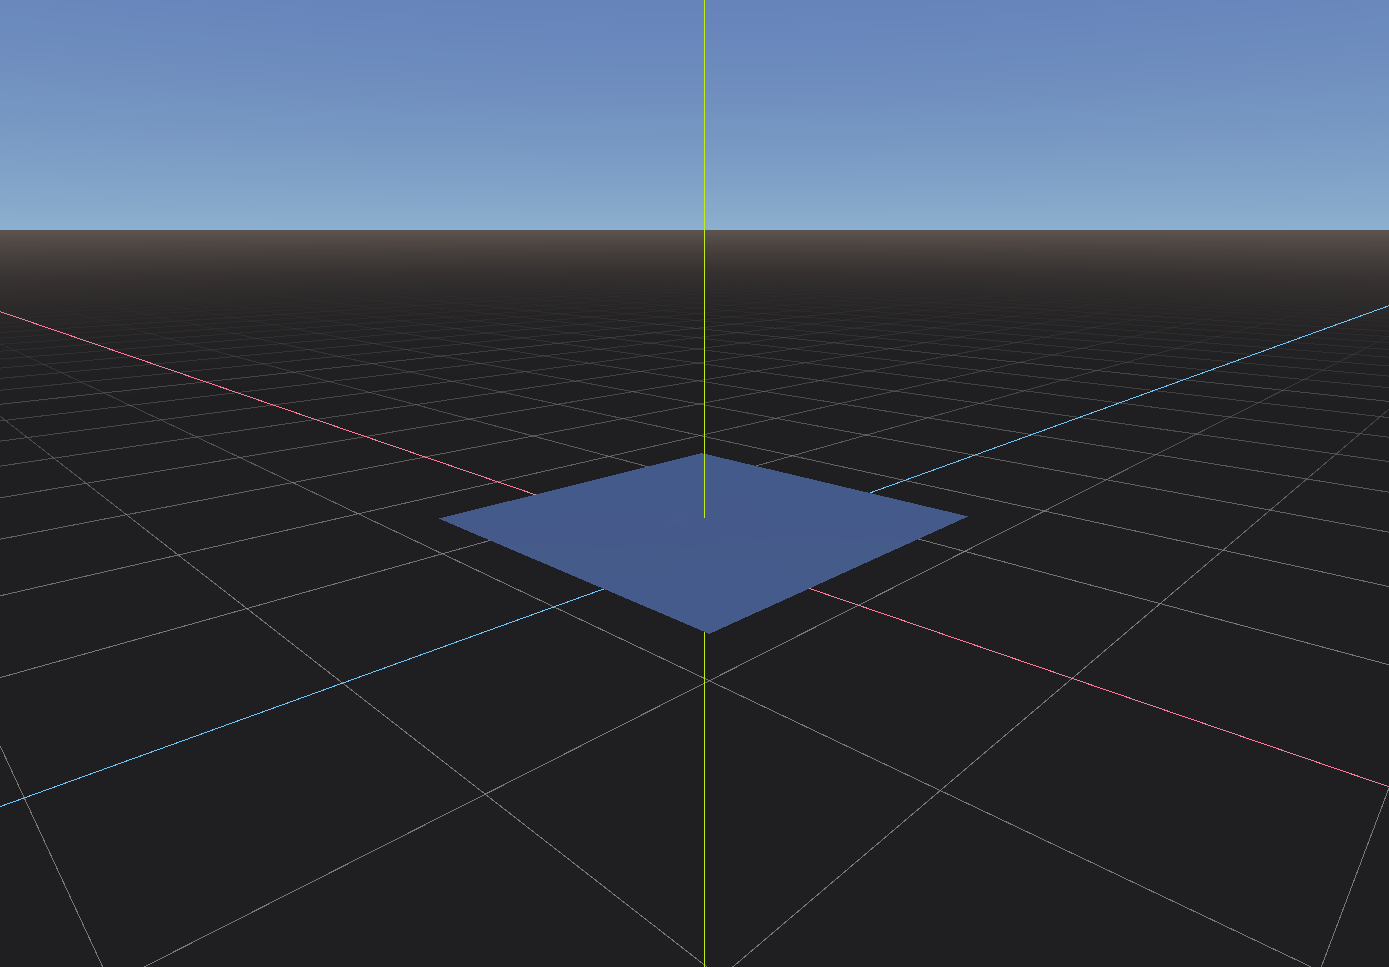 Infinite 3D grid with far away lines fading out